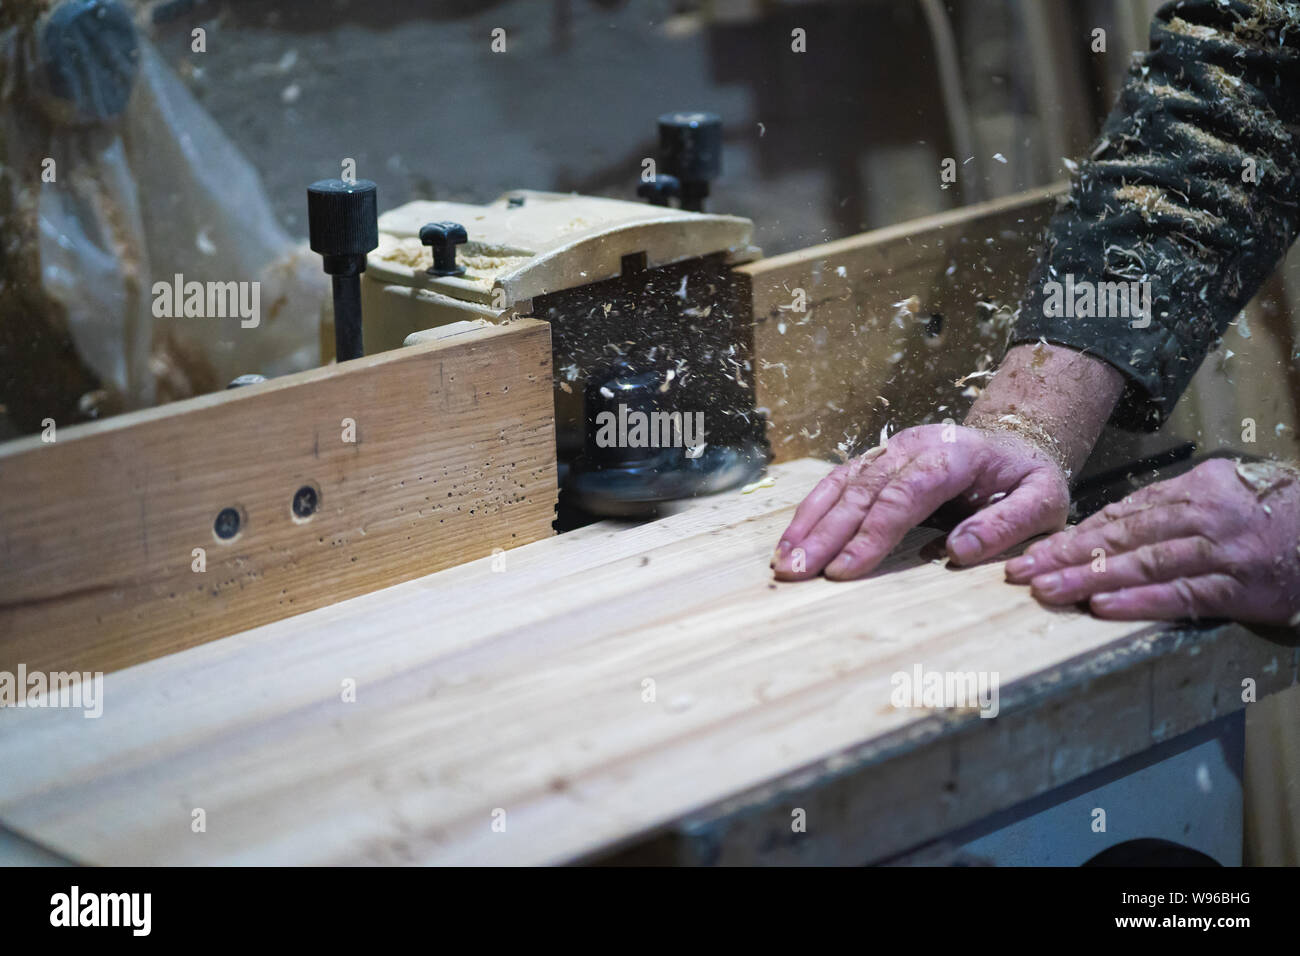 A man is working with wood on milling machine Stock Photo